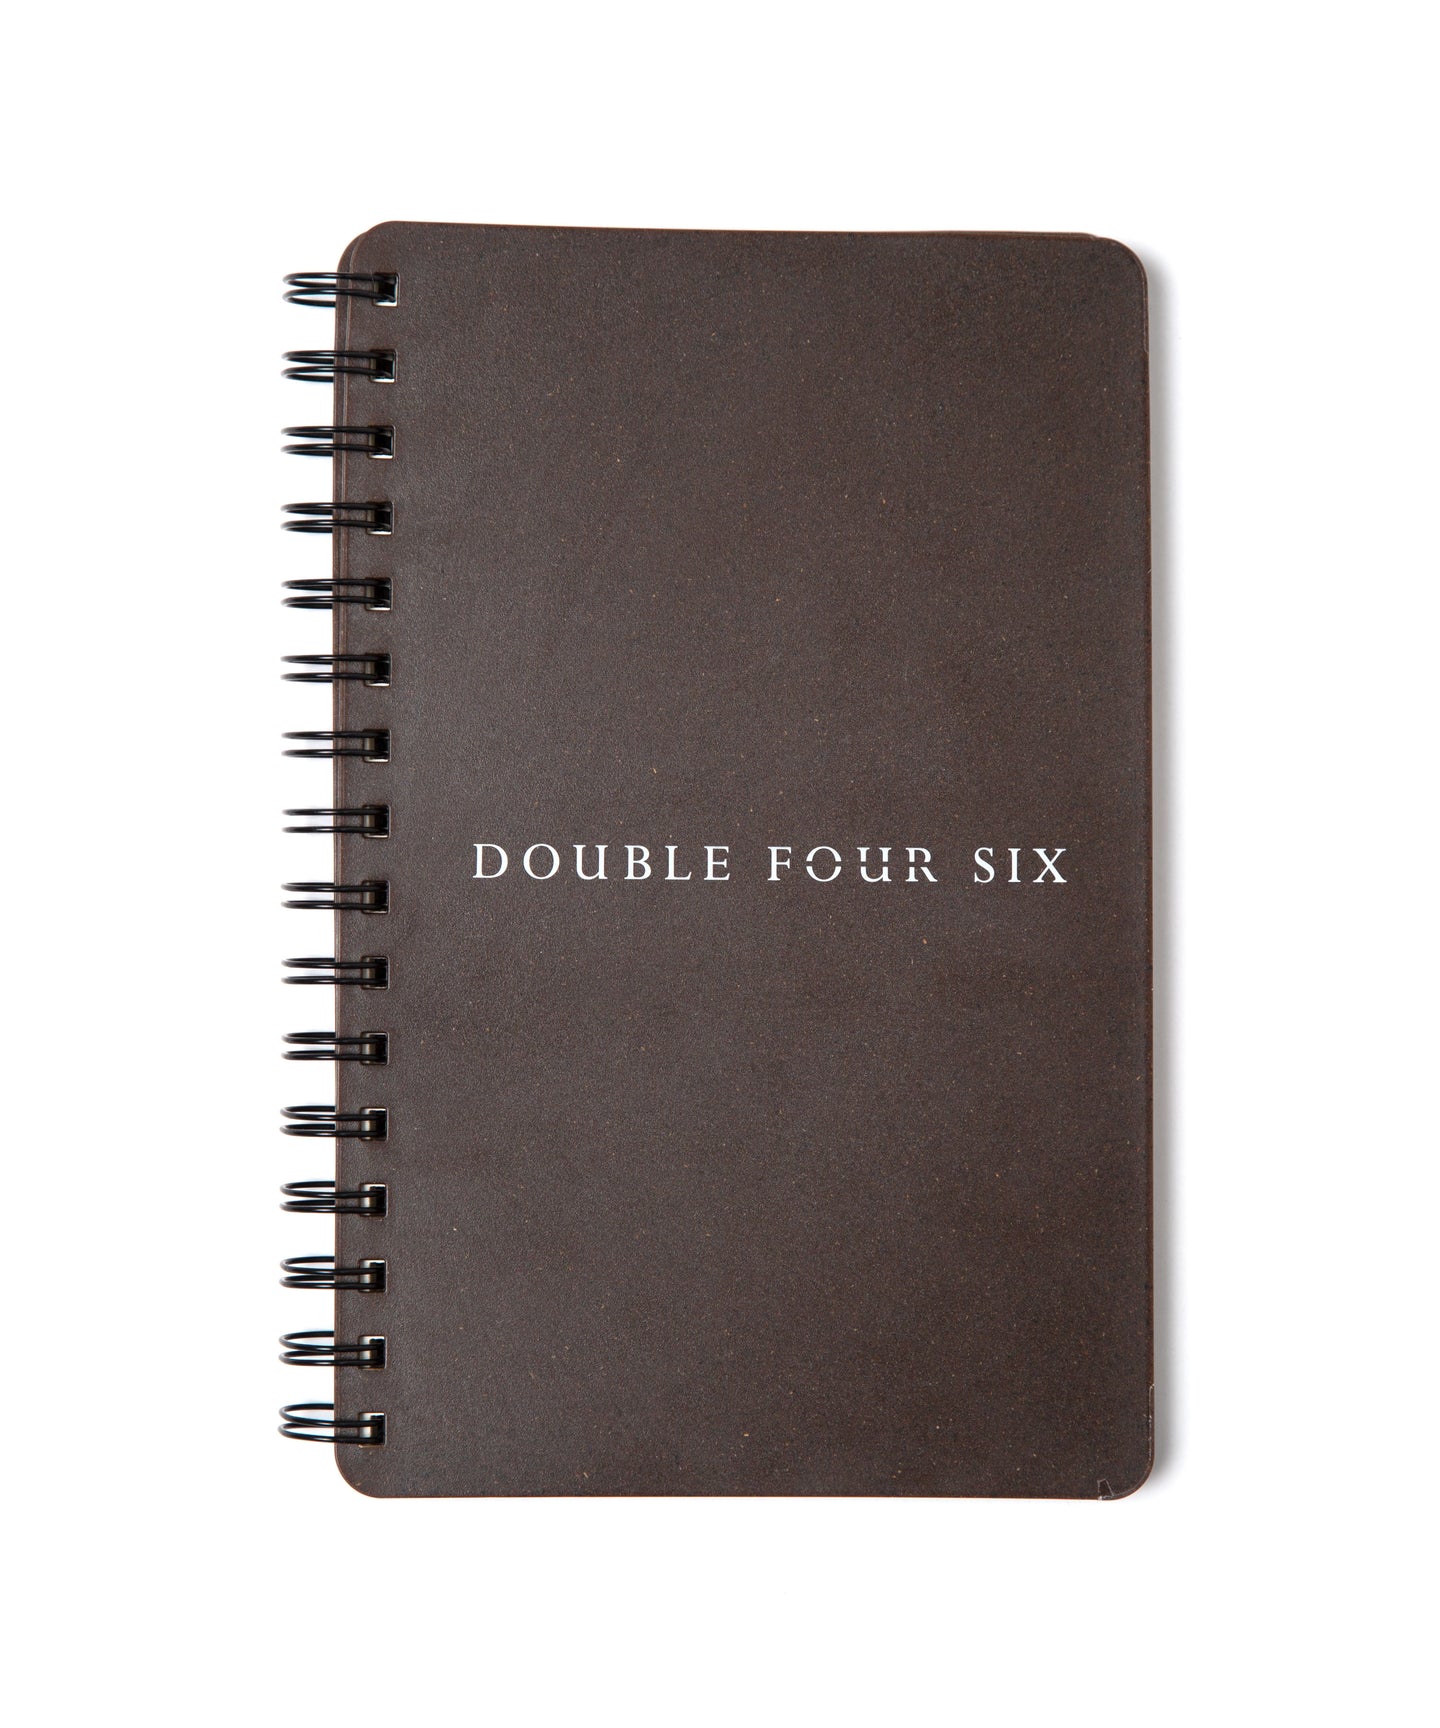 DOUBLE FOUR SIX- Coffee Grounds Notebook